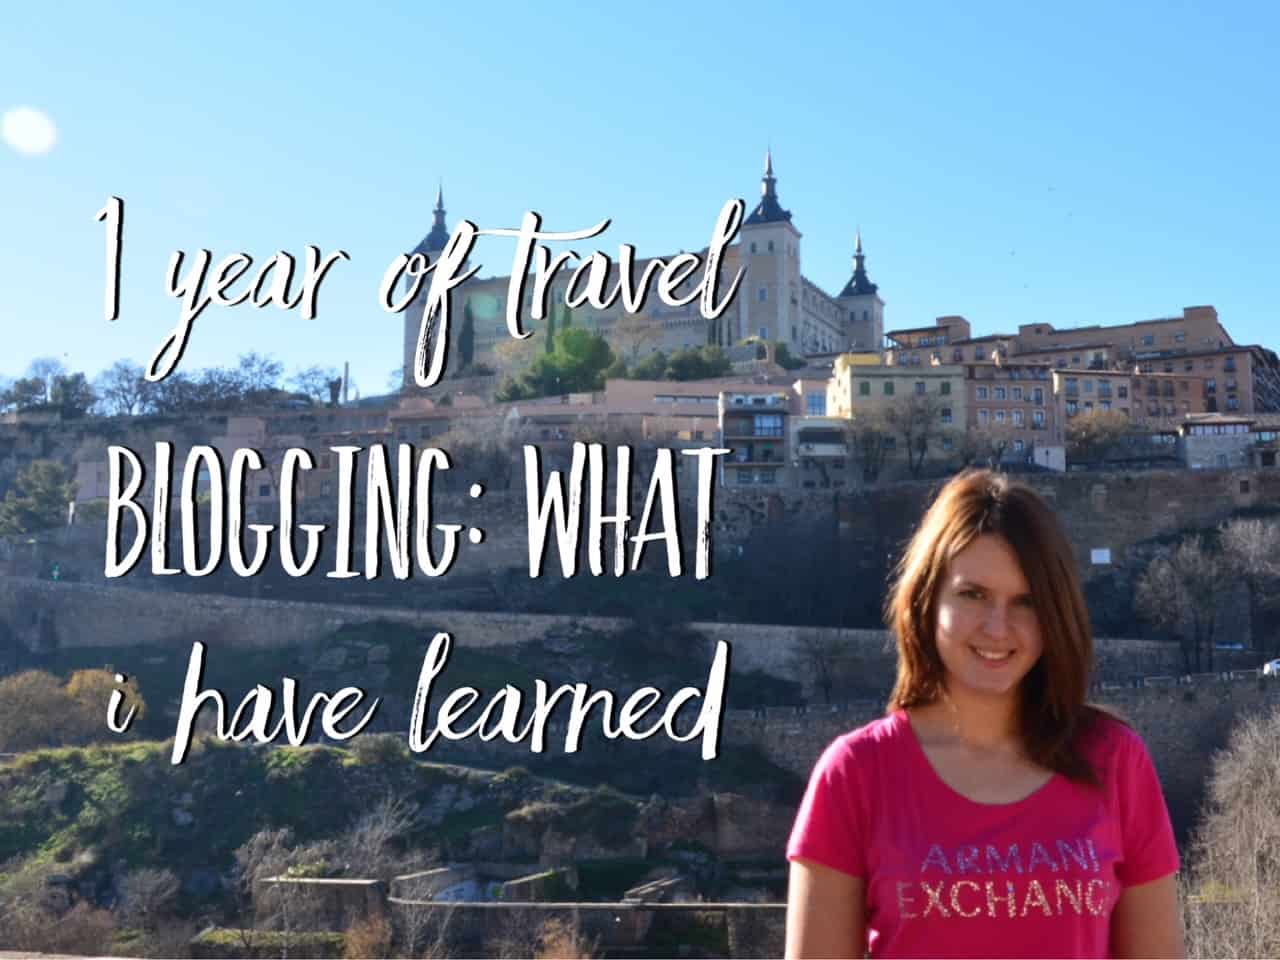 1 year of travel blogging what I have learned